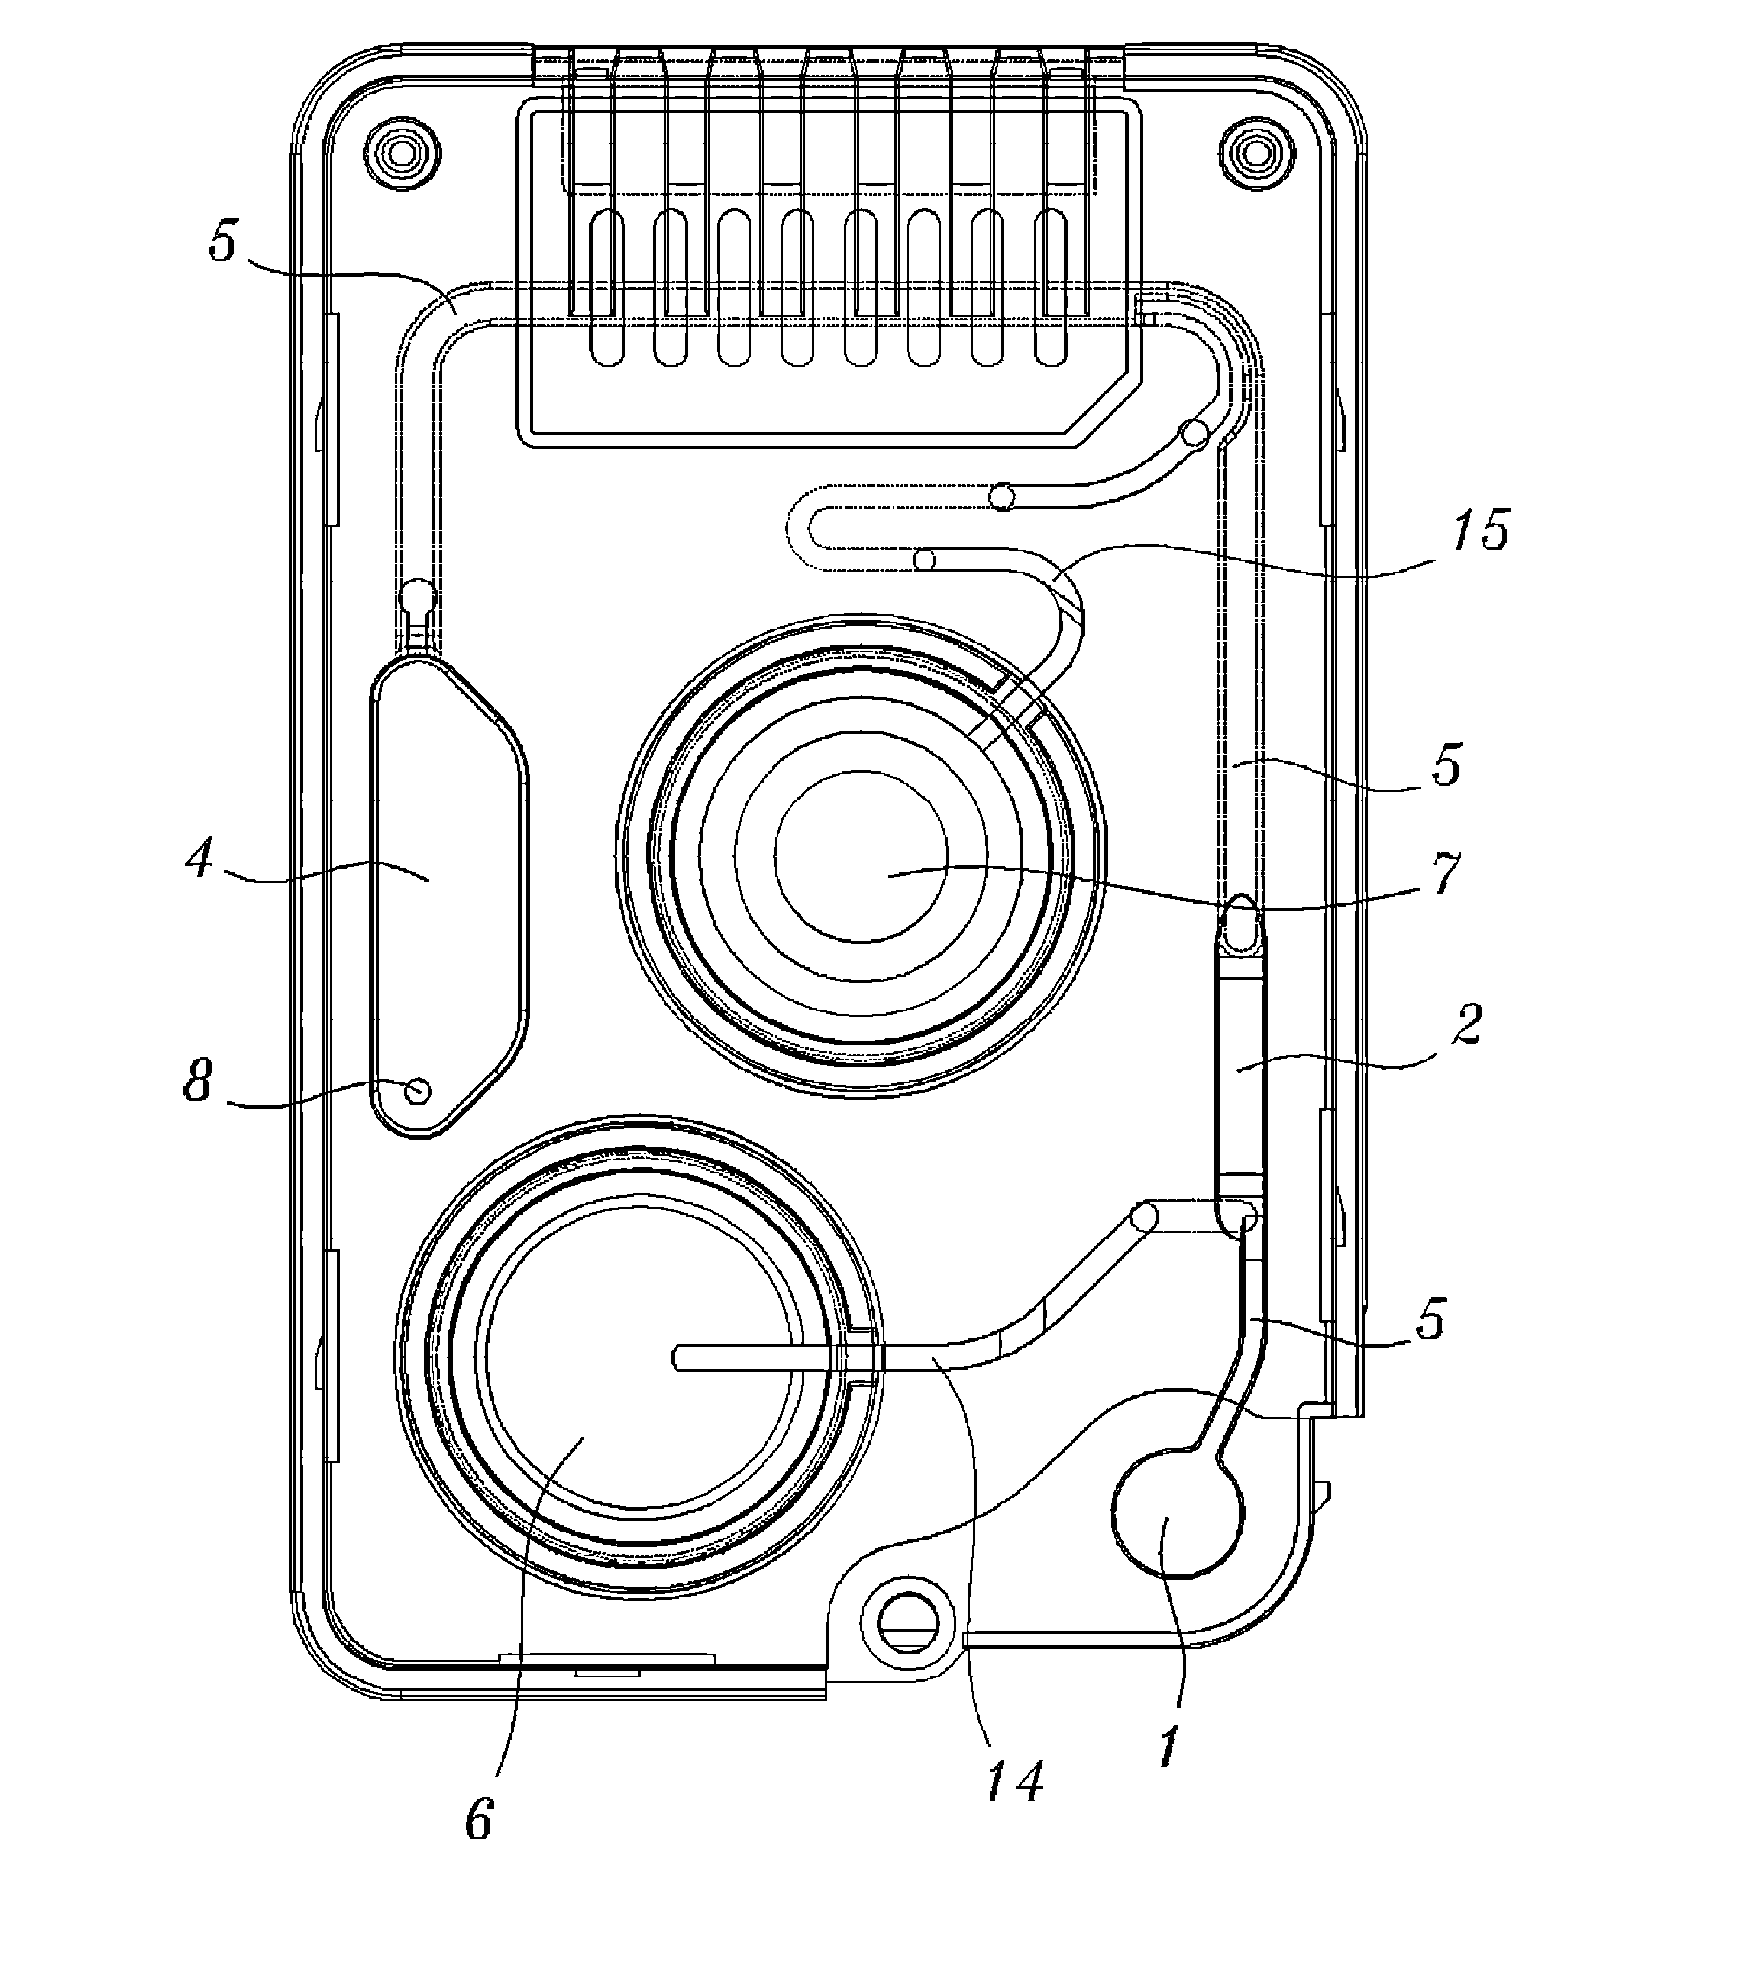 Sensor cartridge for detecting component of at least one sample